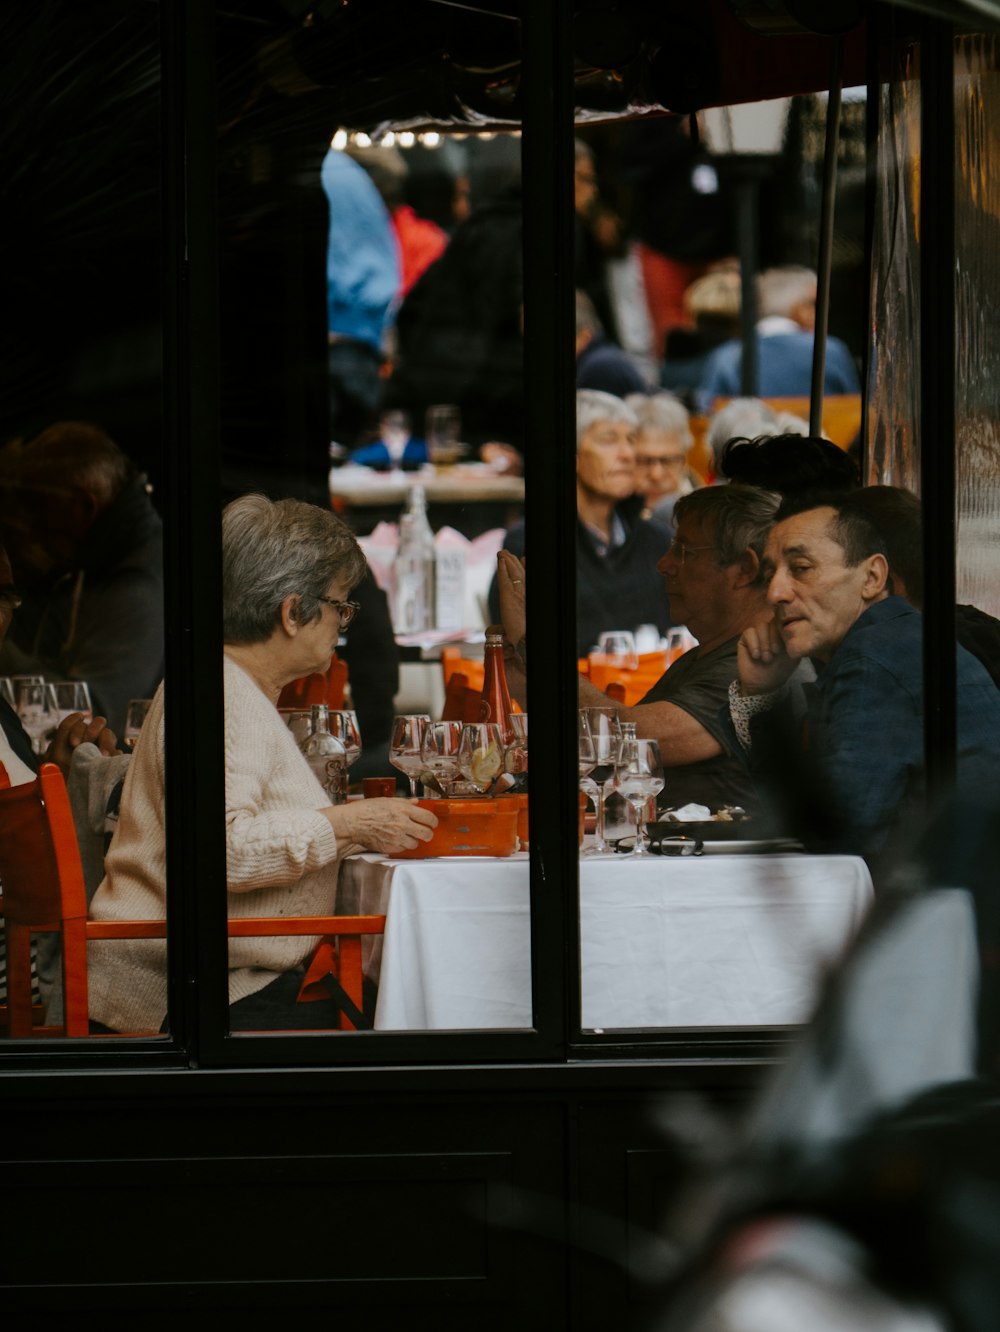 man and woman sitting at table during daytime